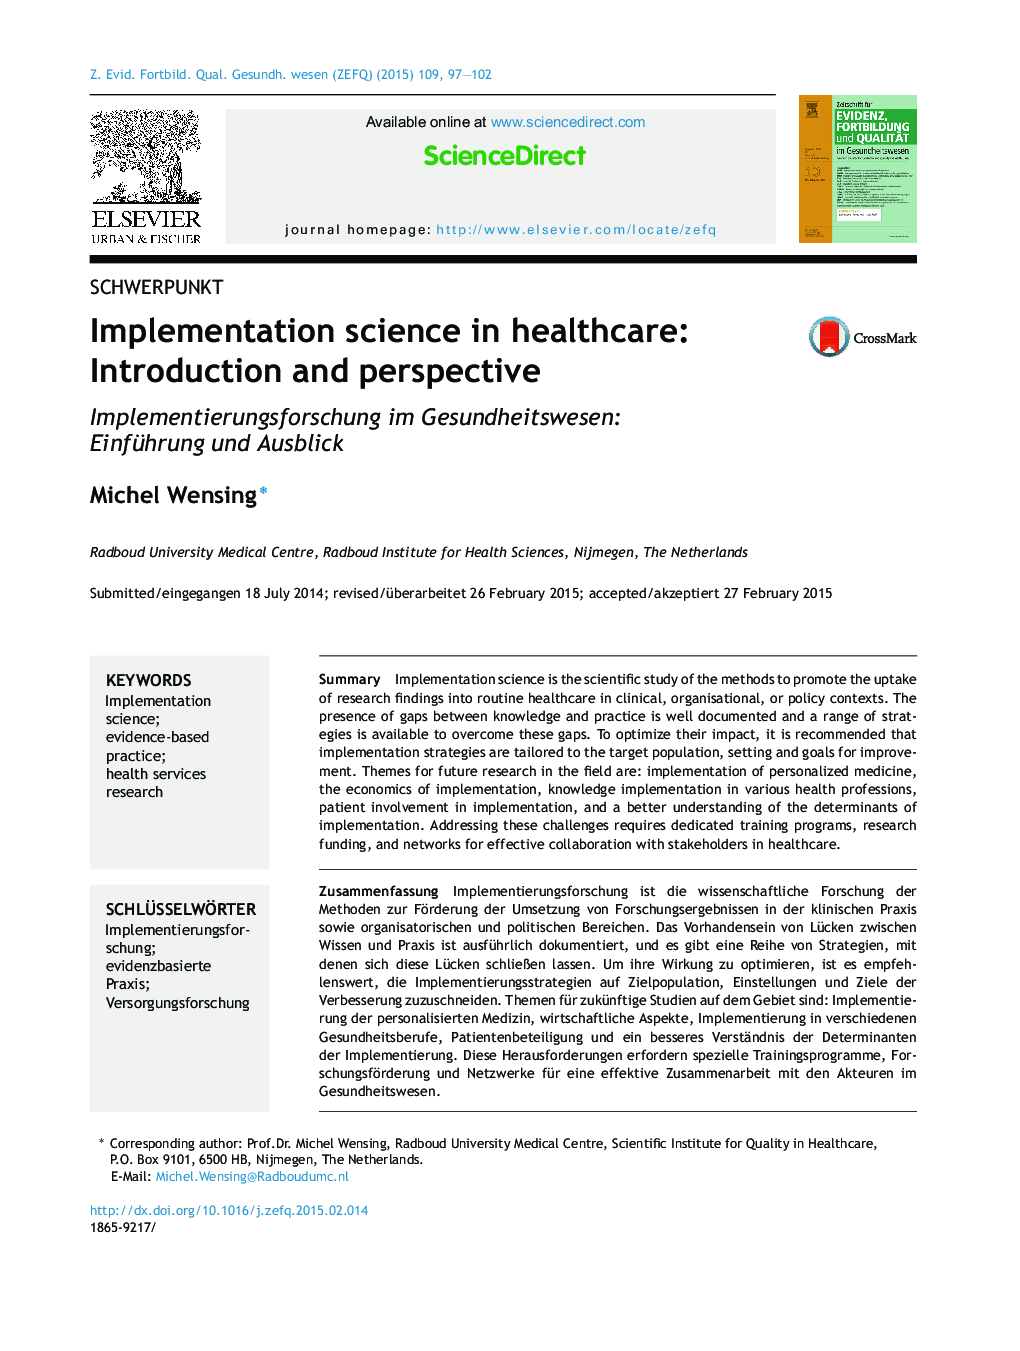 Implementation science in healthcare: Introduction and perspective